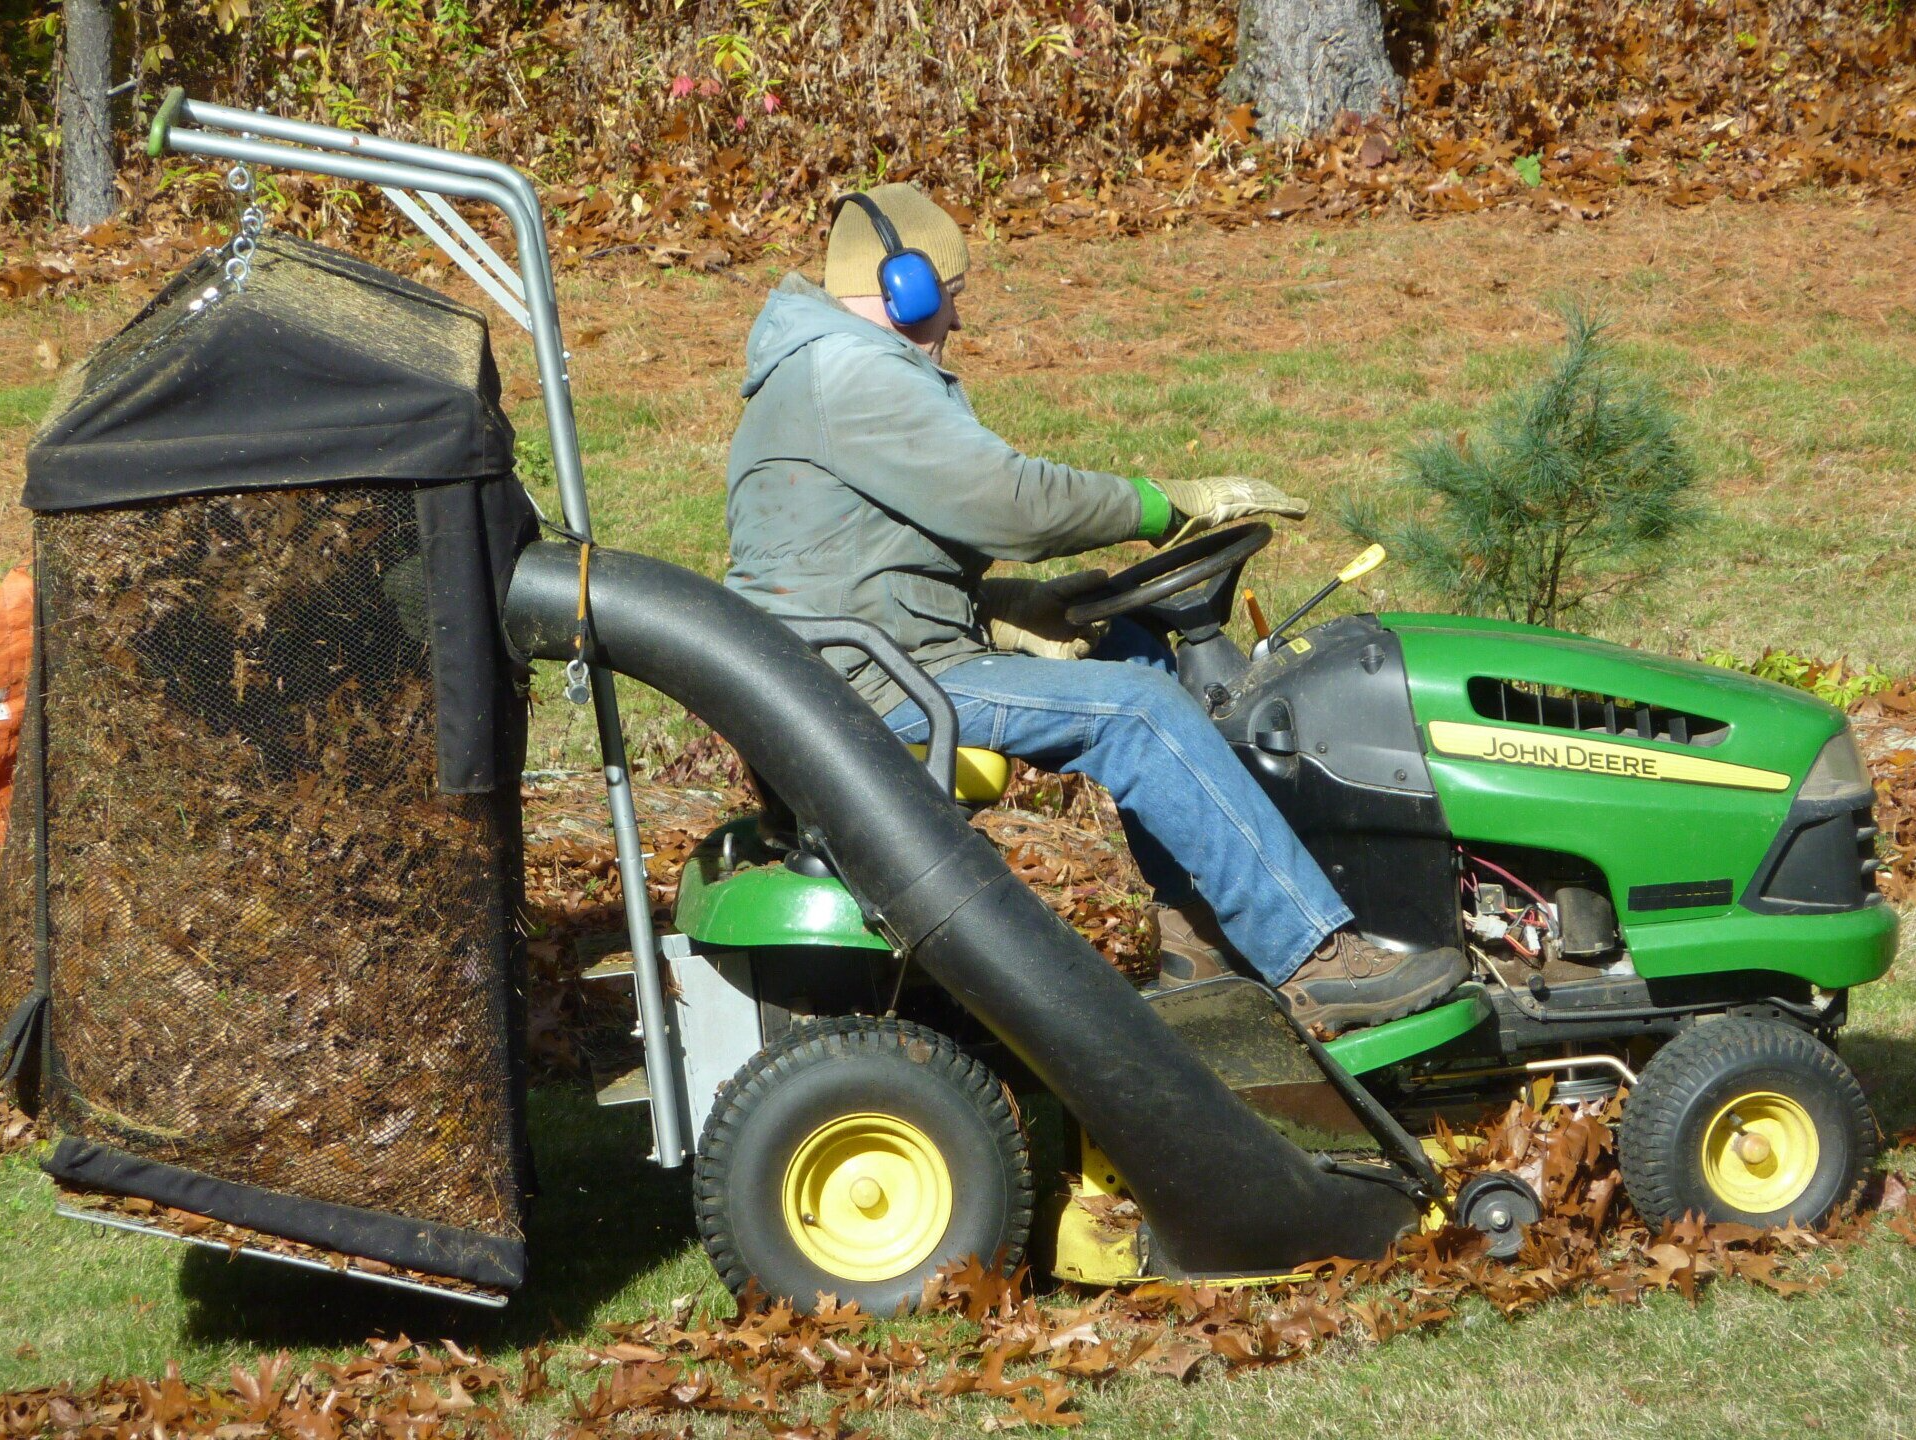 The lawnmower part that wins all the leaf bagging: The Big Leaf